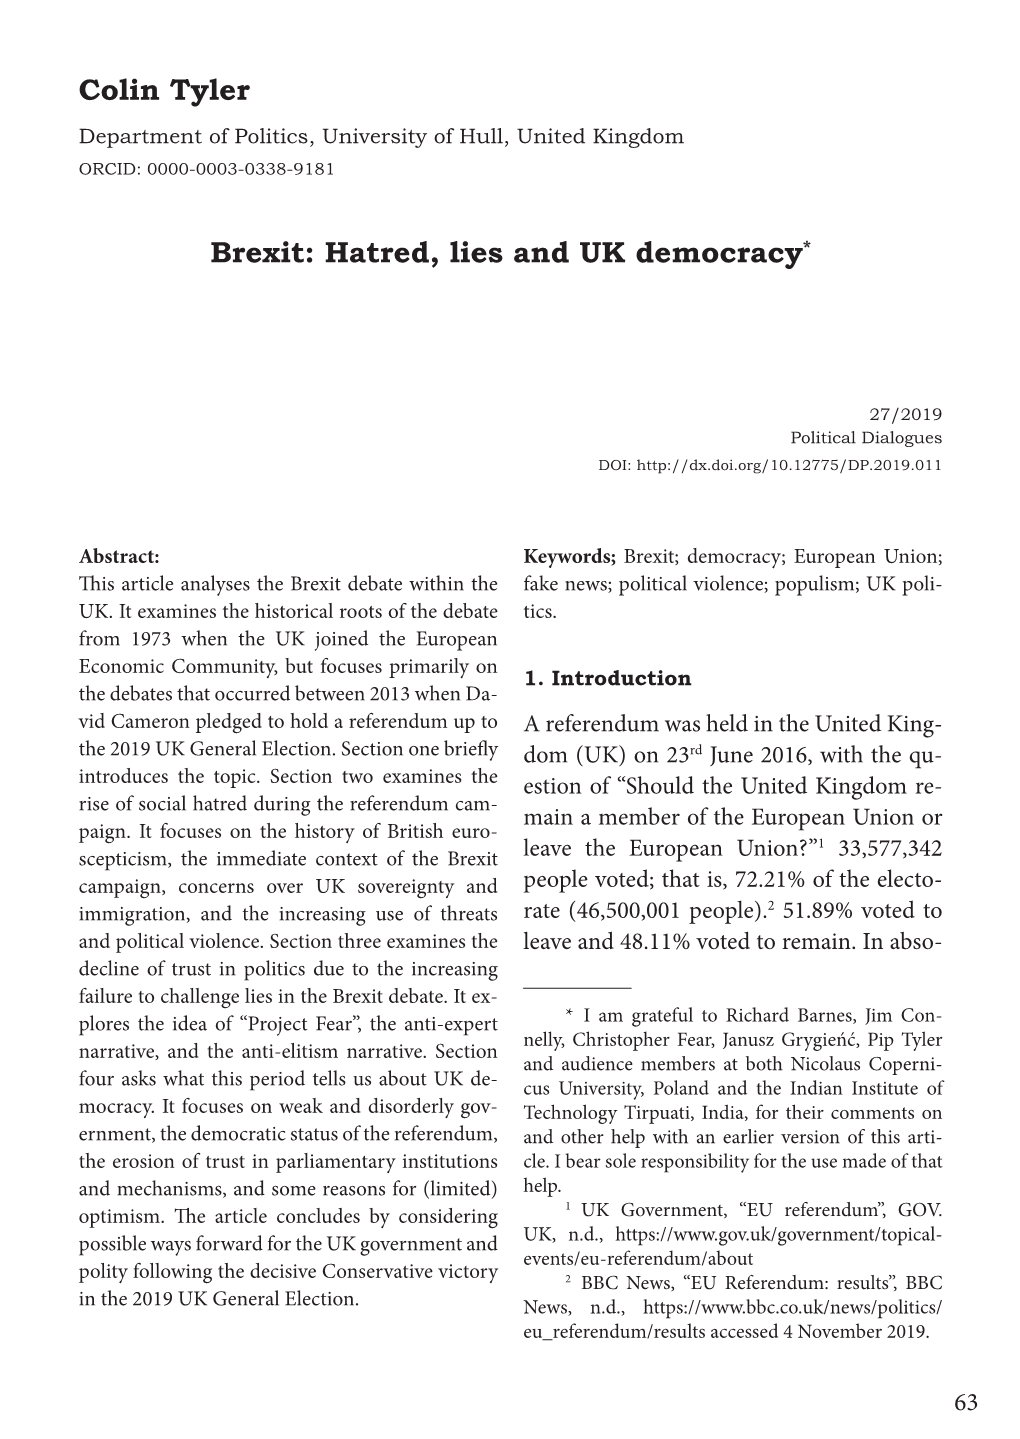 Colin Tyler Brexit: Hatred, Lies and UK Democracy*